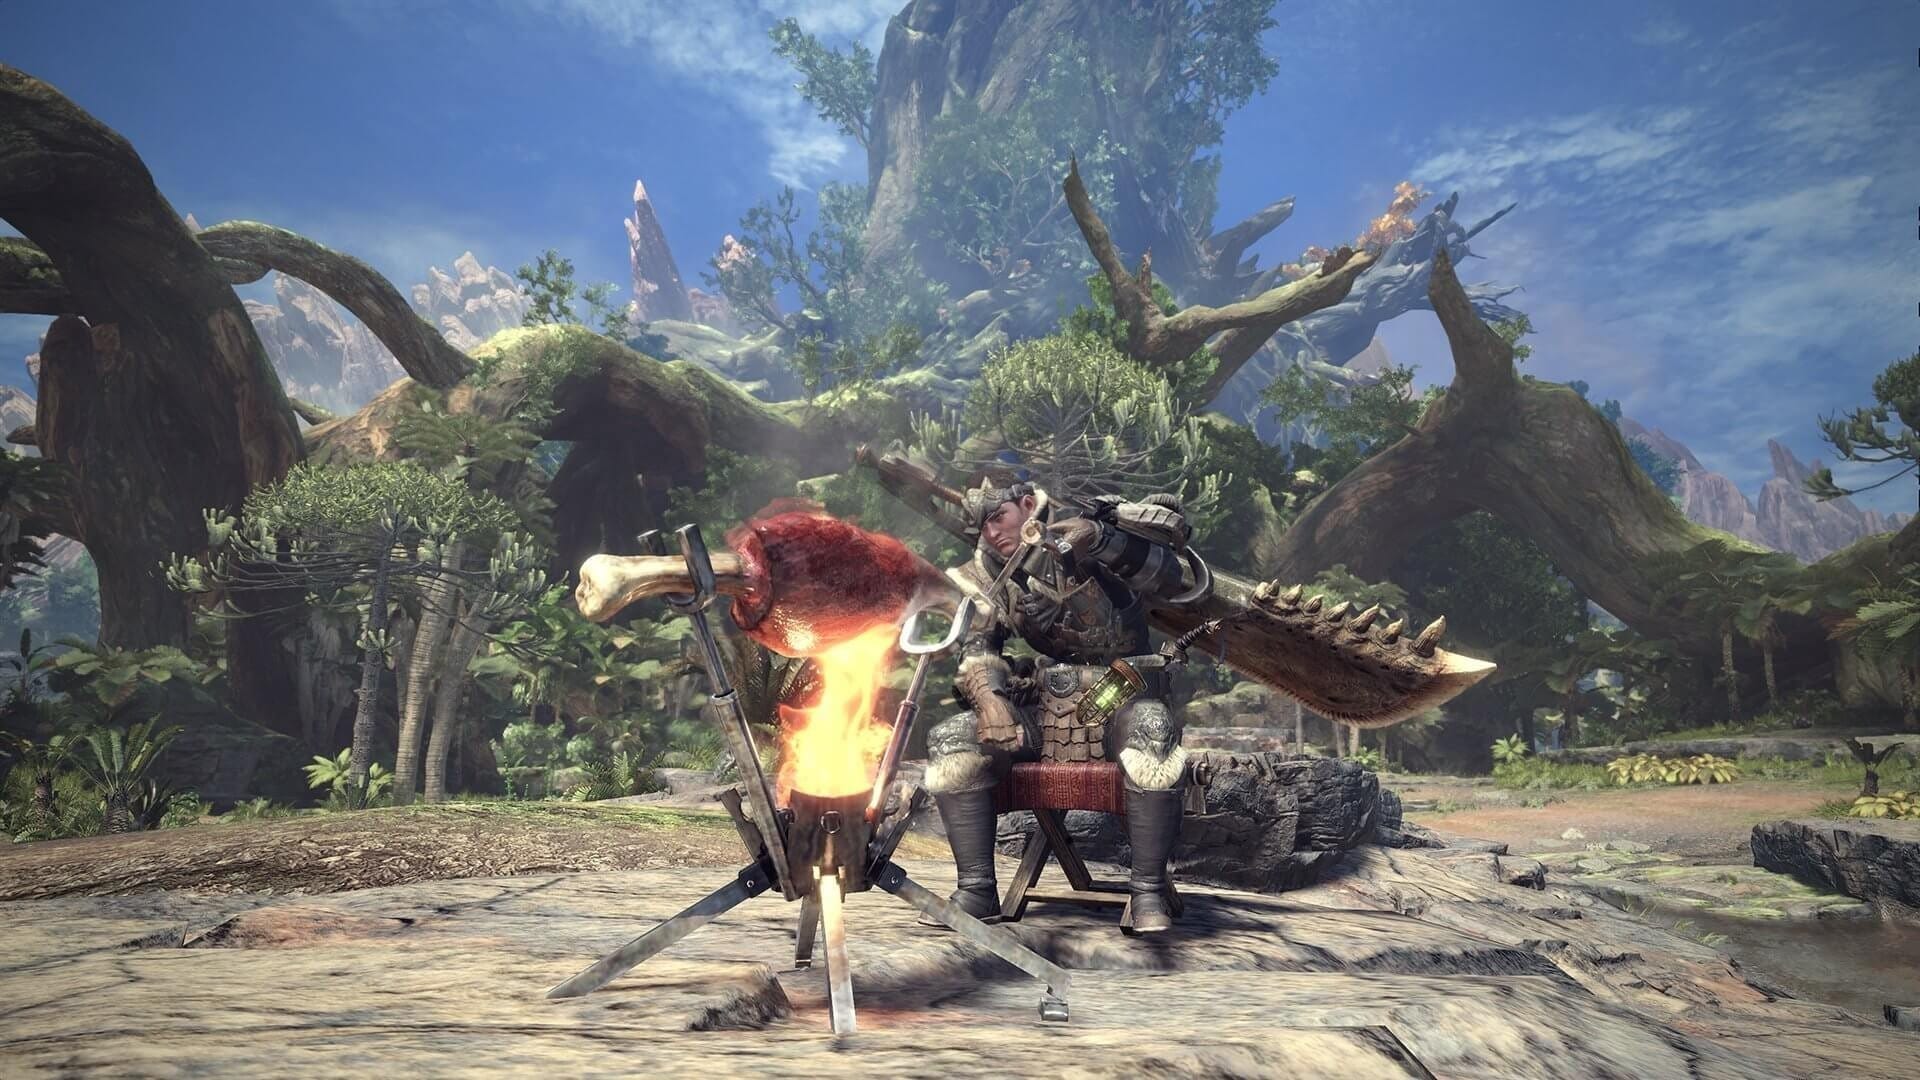 Buy MONSTER HUNTER: WORLD from the Humble Store